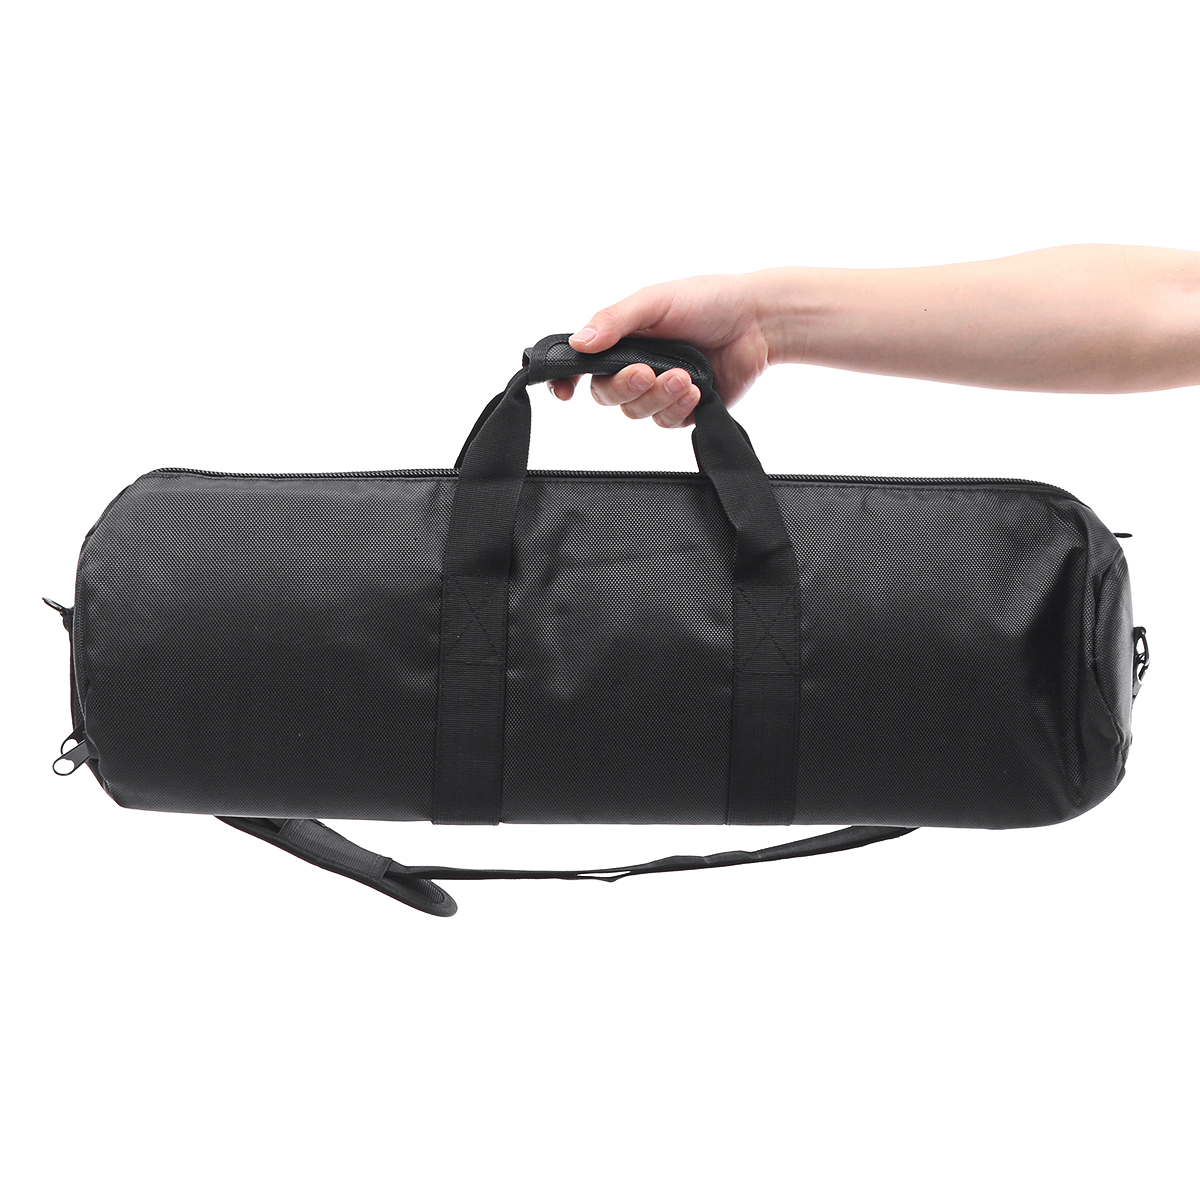 607080cm-Camera-Tripod-Storage-Bag-Travel-Carry-Case-Photography-Accessories-1526351-6